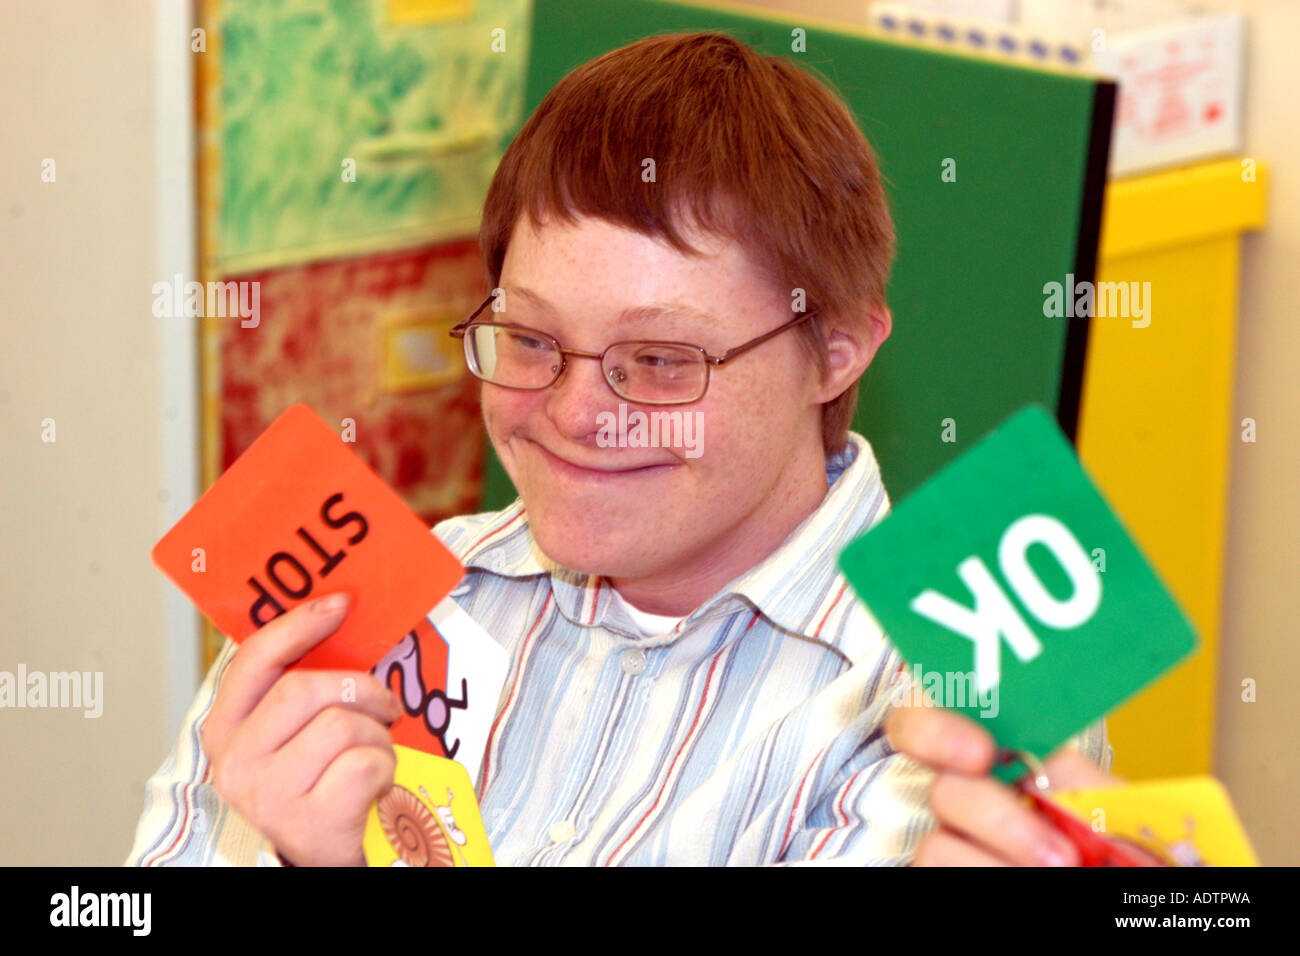 A young Downs Syndrome man at a Learning Disabilities support group meeting uses cards to express himself in meetings to aid com Stock Photo